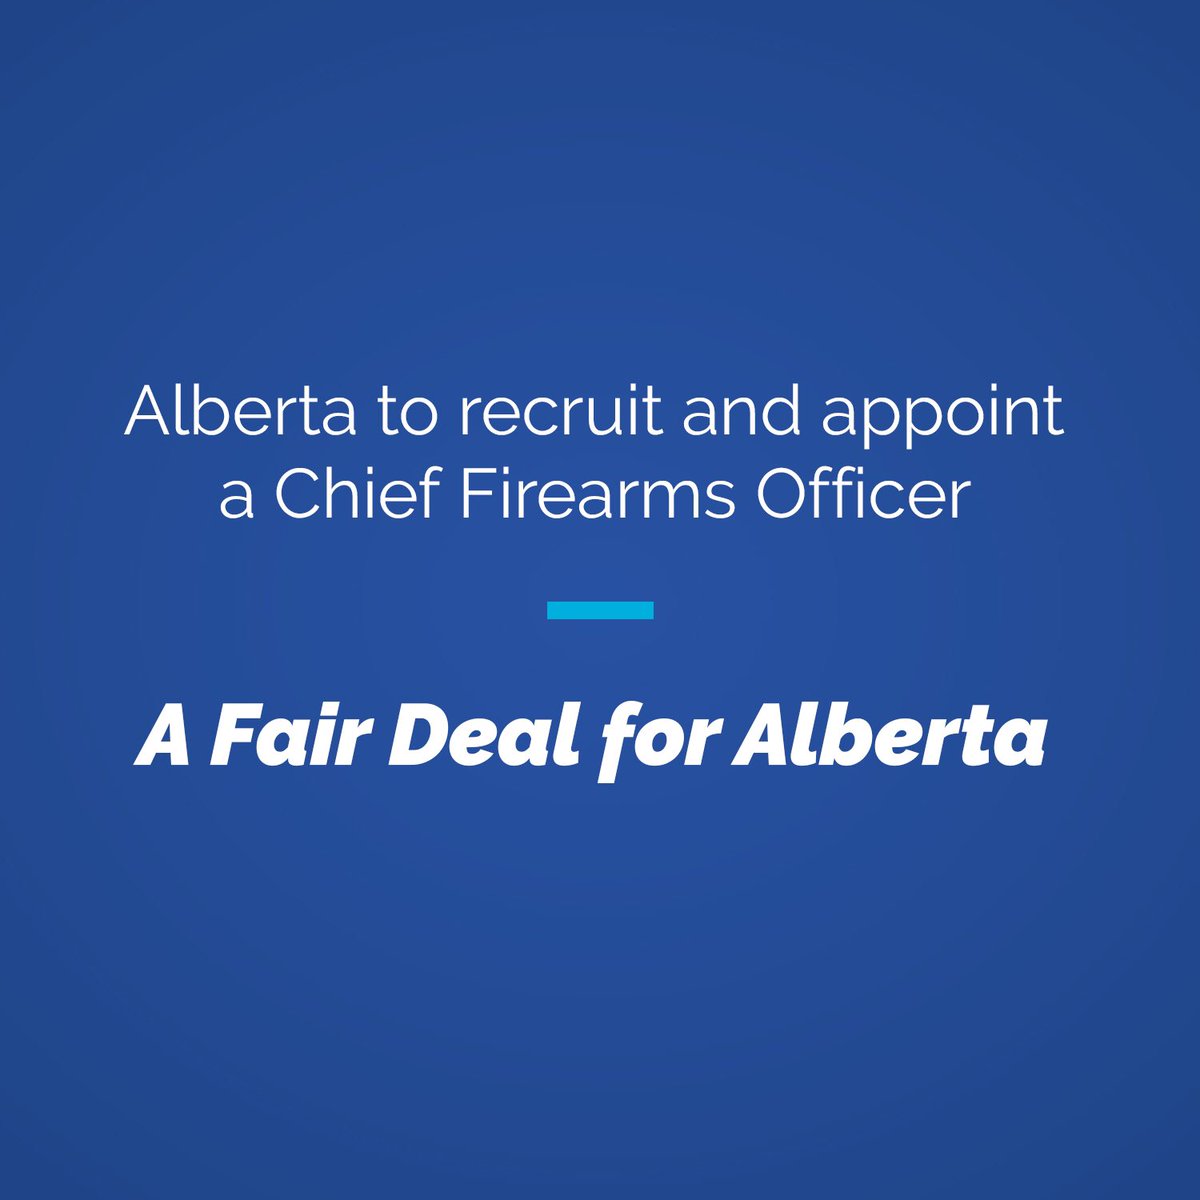 Also worth noting - we marked the release of the Fair Deal Report by sharing that we will follow through on another recommendation.We will be moving quickly to recruit and appoint an Alberta Chief Firearms Officer to replace Ottawa’s appointee. https://www.alberta.ca/announcements.cfm?xID=72625A4C39C25-EEC4-F7E5-B043834863733F1E